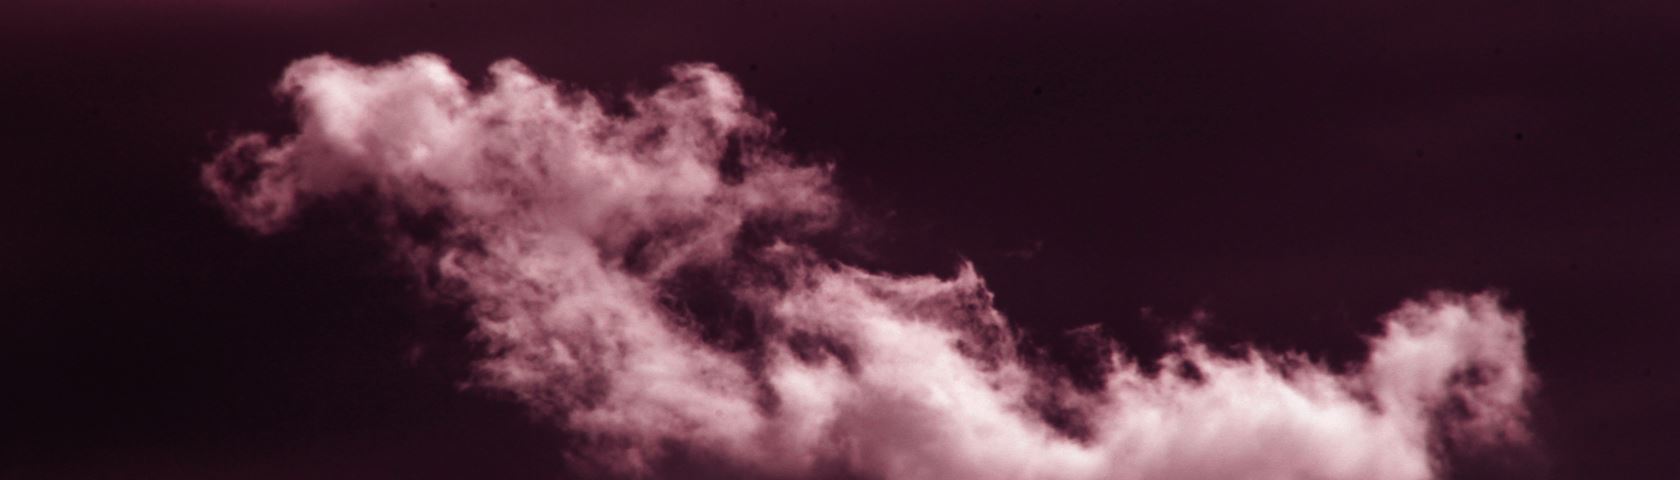 Unusual Cloud on Infrared